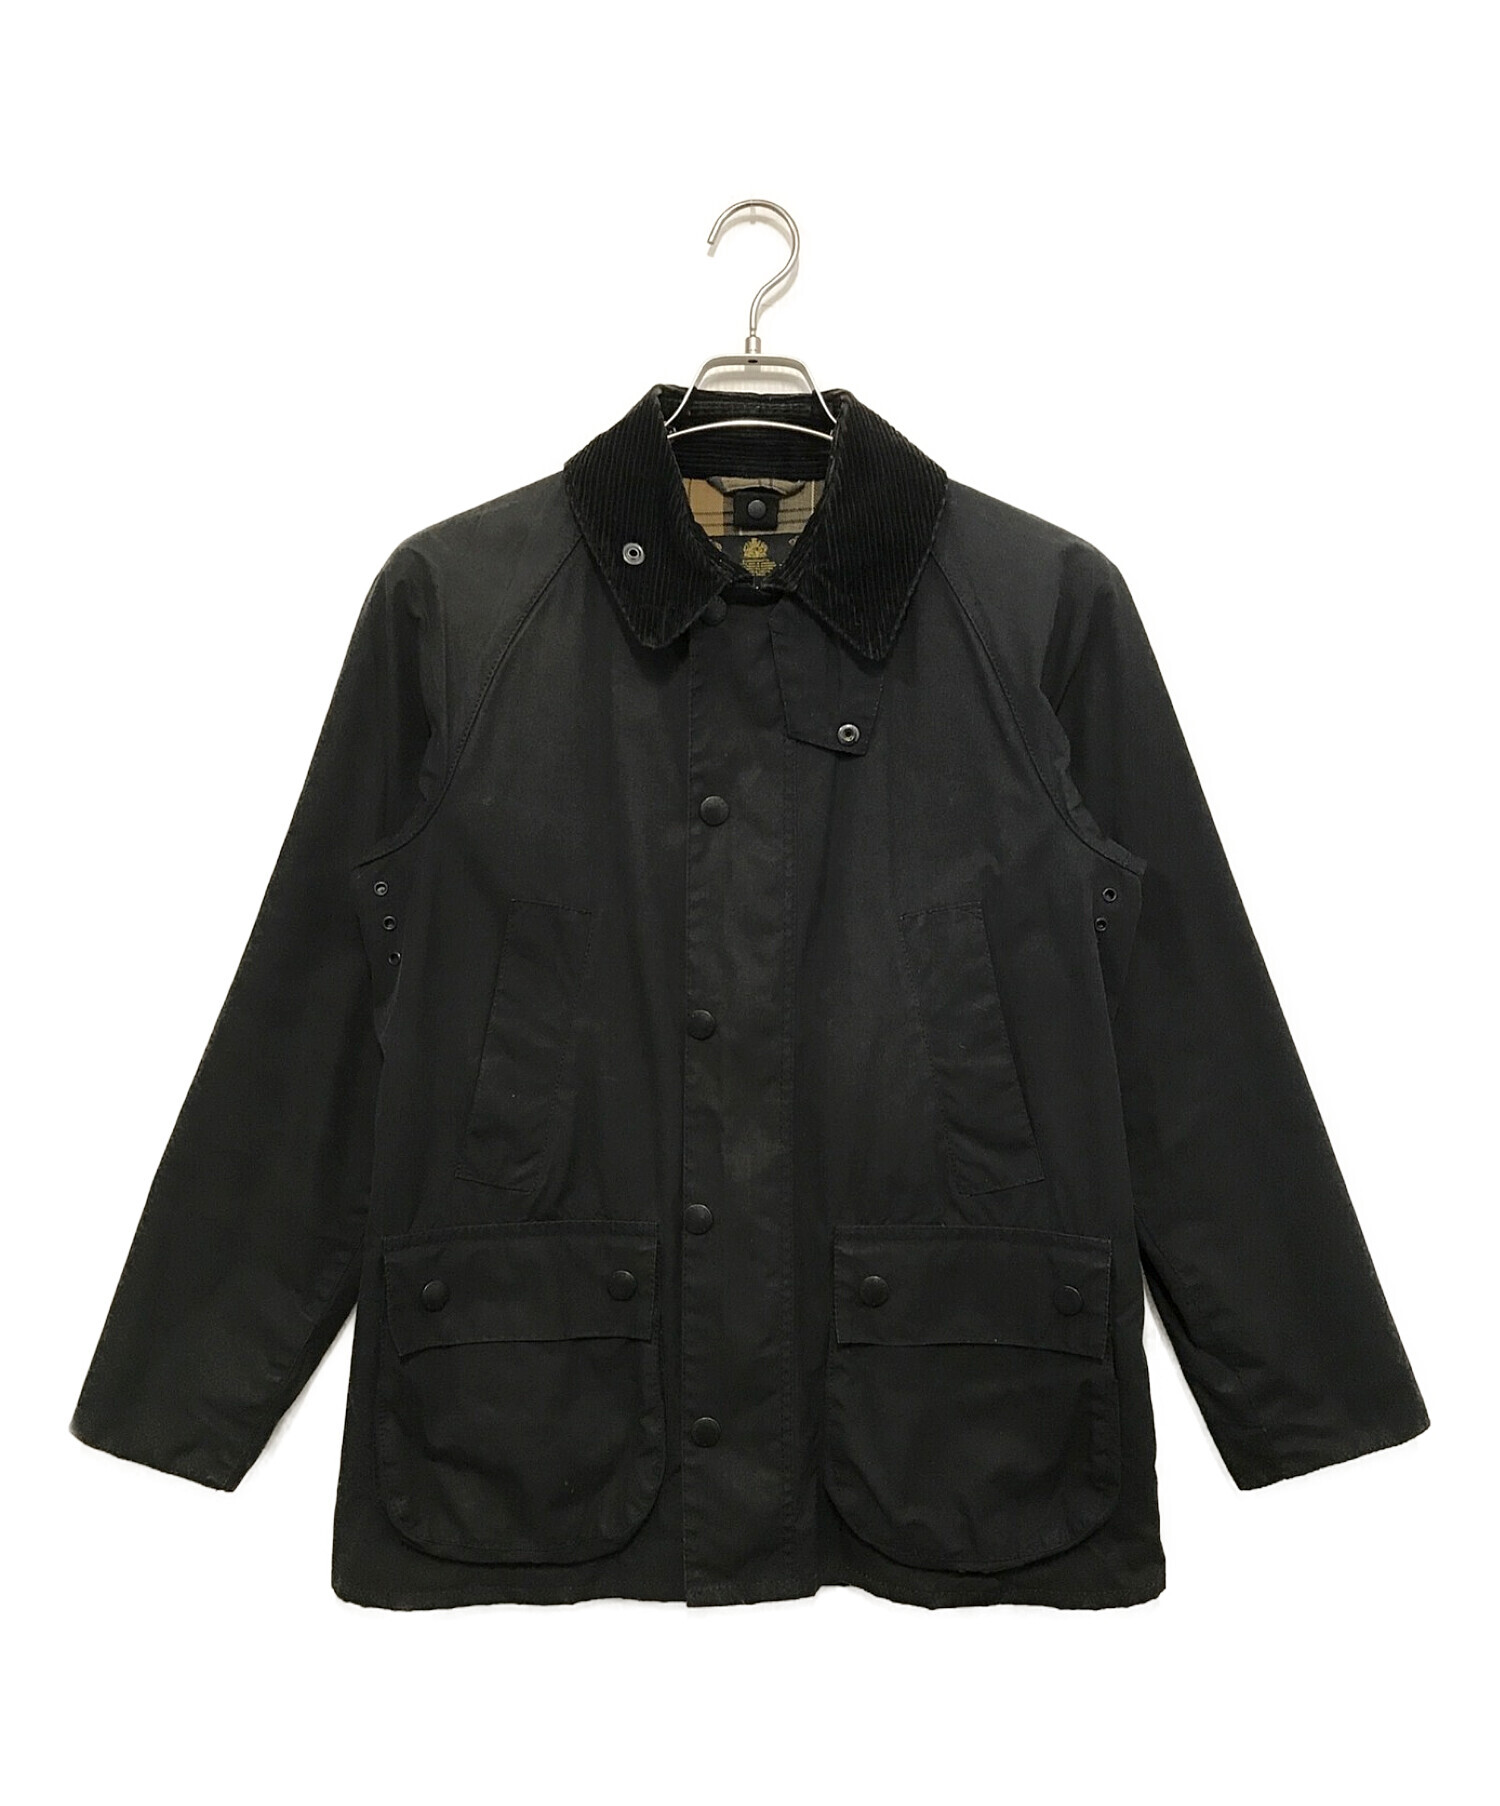 Barbour bedale SL 34 Black - ブルゾン